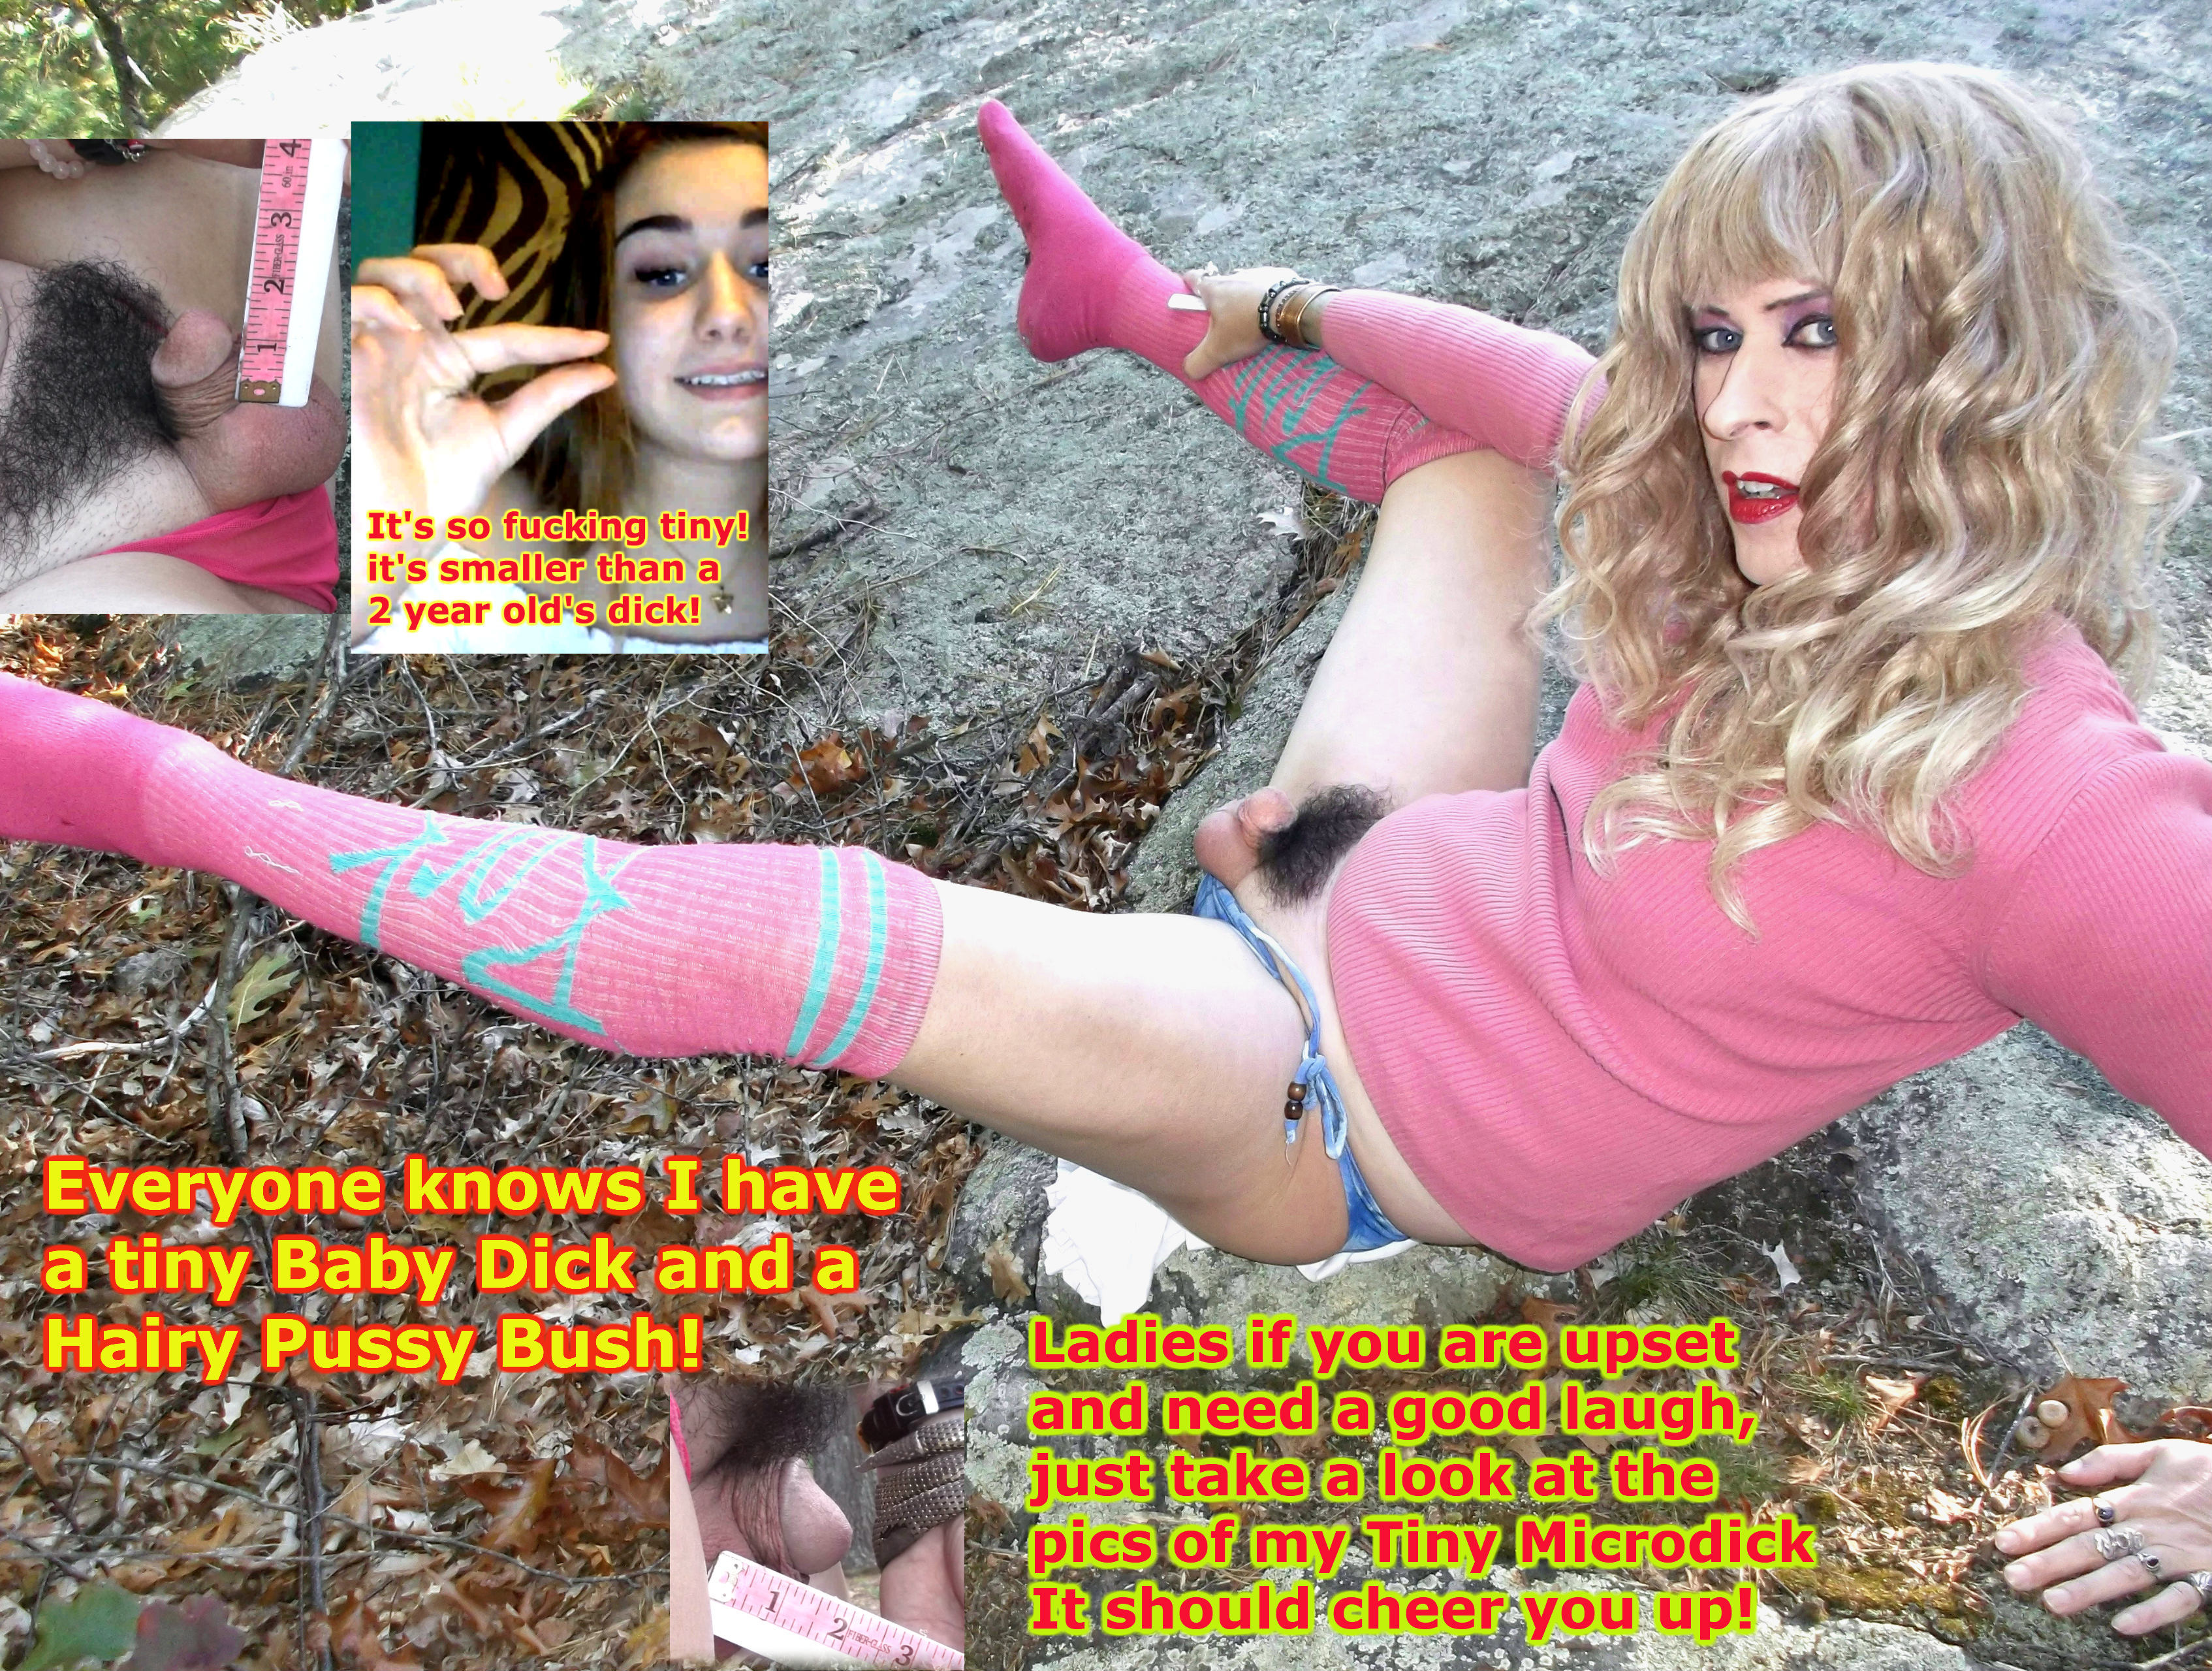 Shemale Tiny Cock Sissy - Hairy pussy crossdresser shows her itty bitty baby - Shemale ...